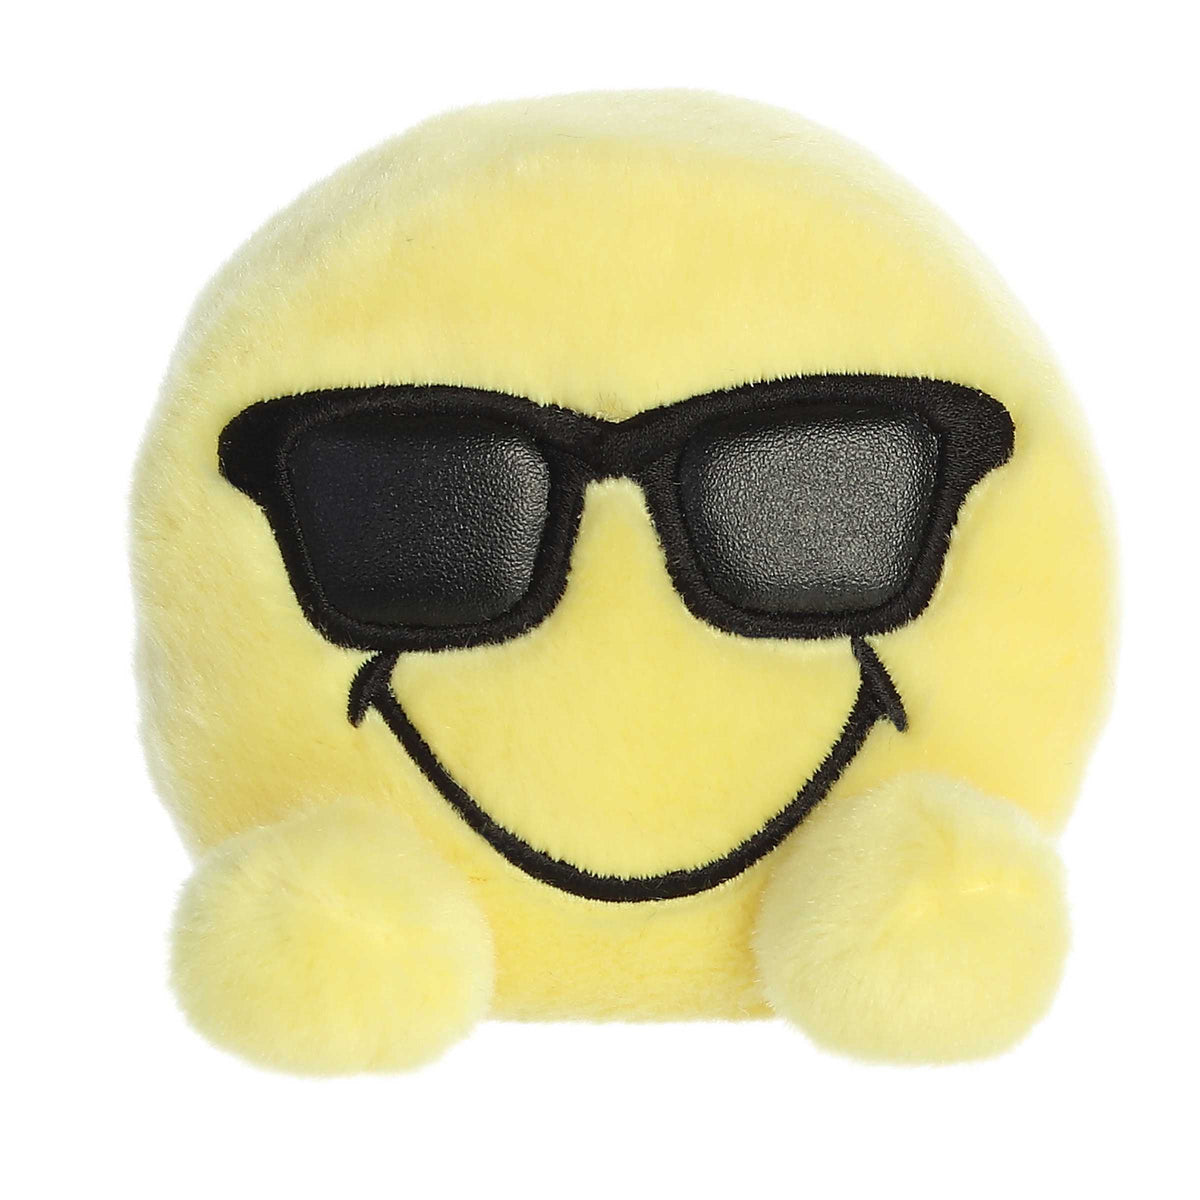 SmileyWorld Shades plush, sunny yellow with cool shades and a big smile